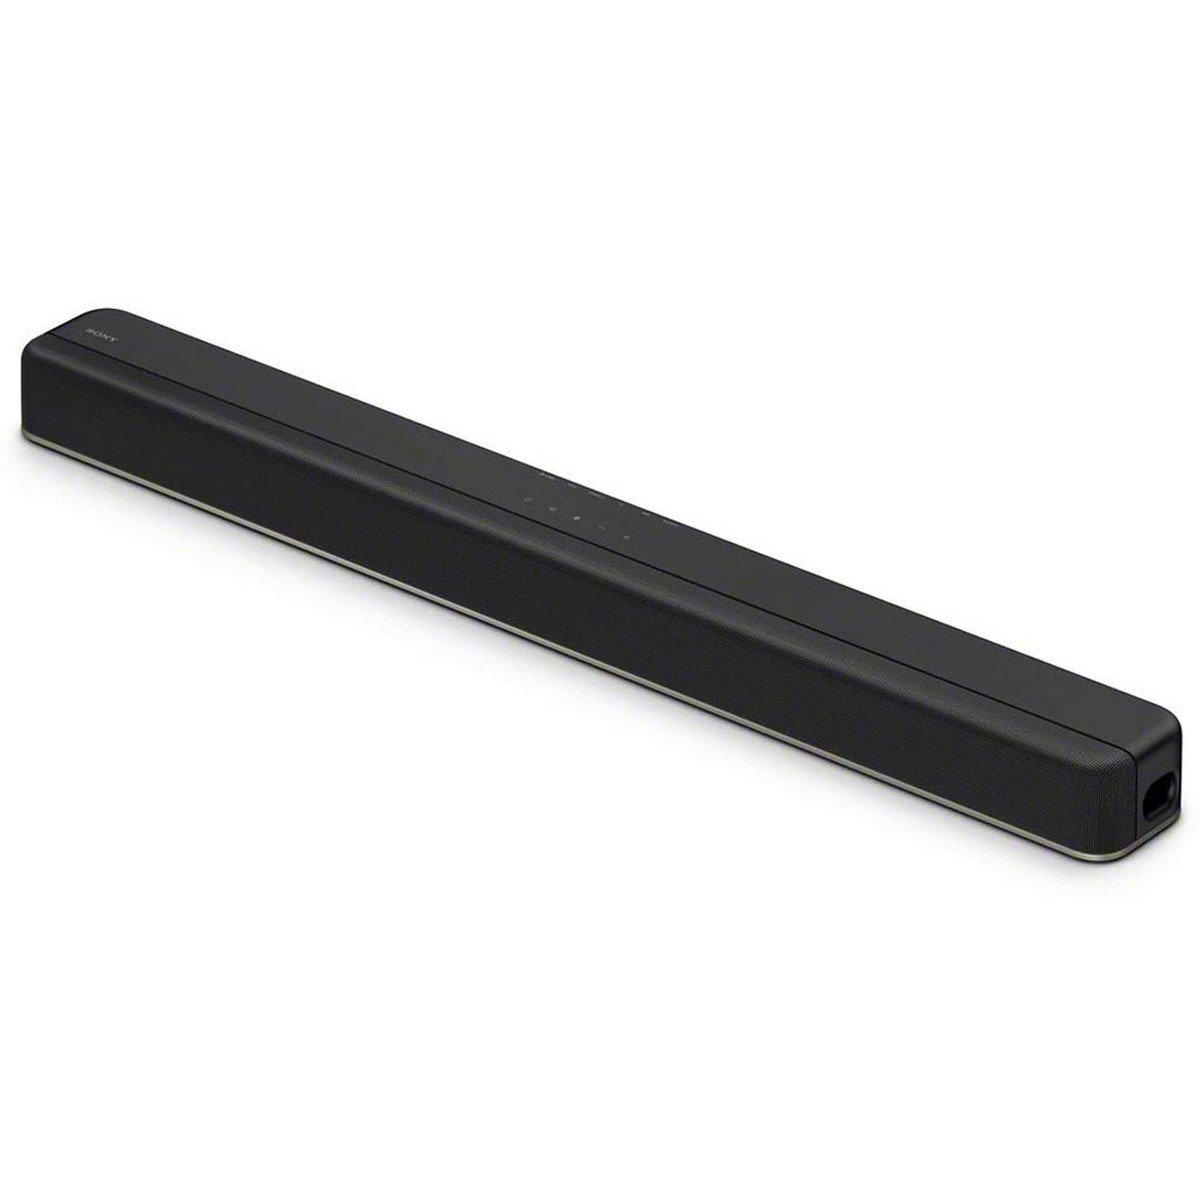 Sony Single Sound Bar with built-in subwoofer HT-X8500